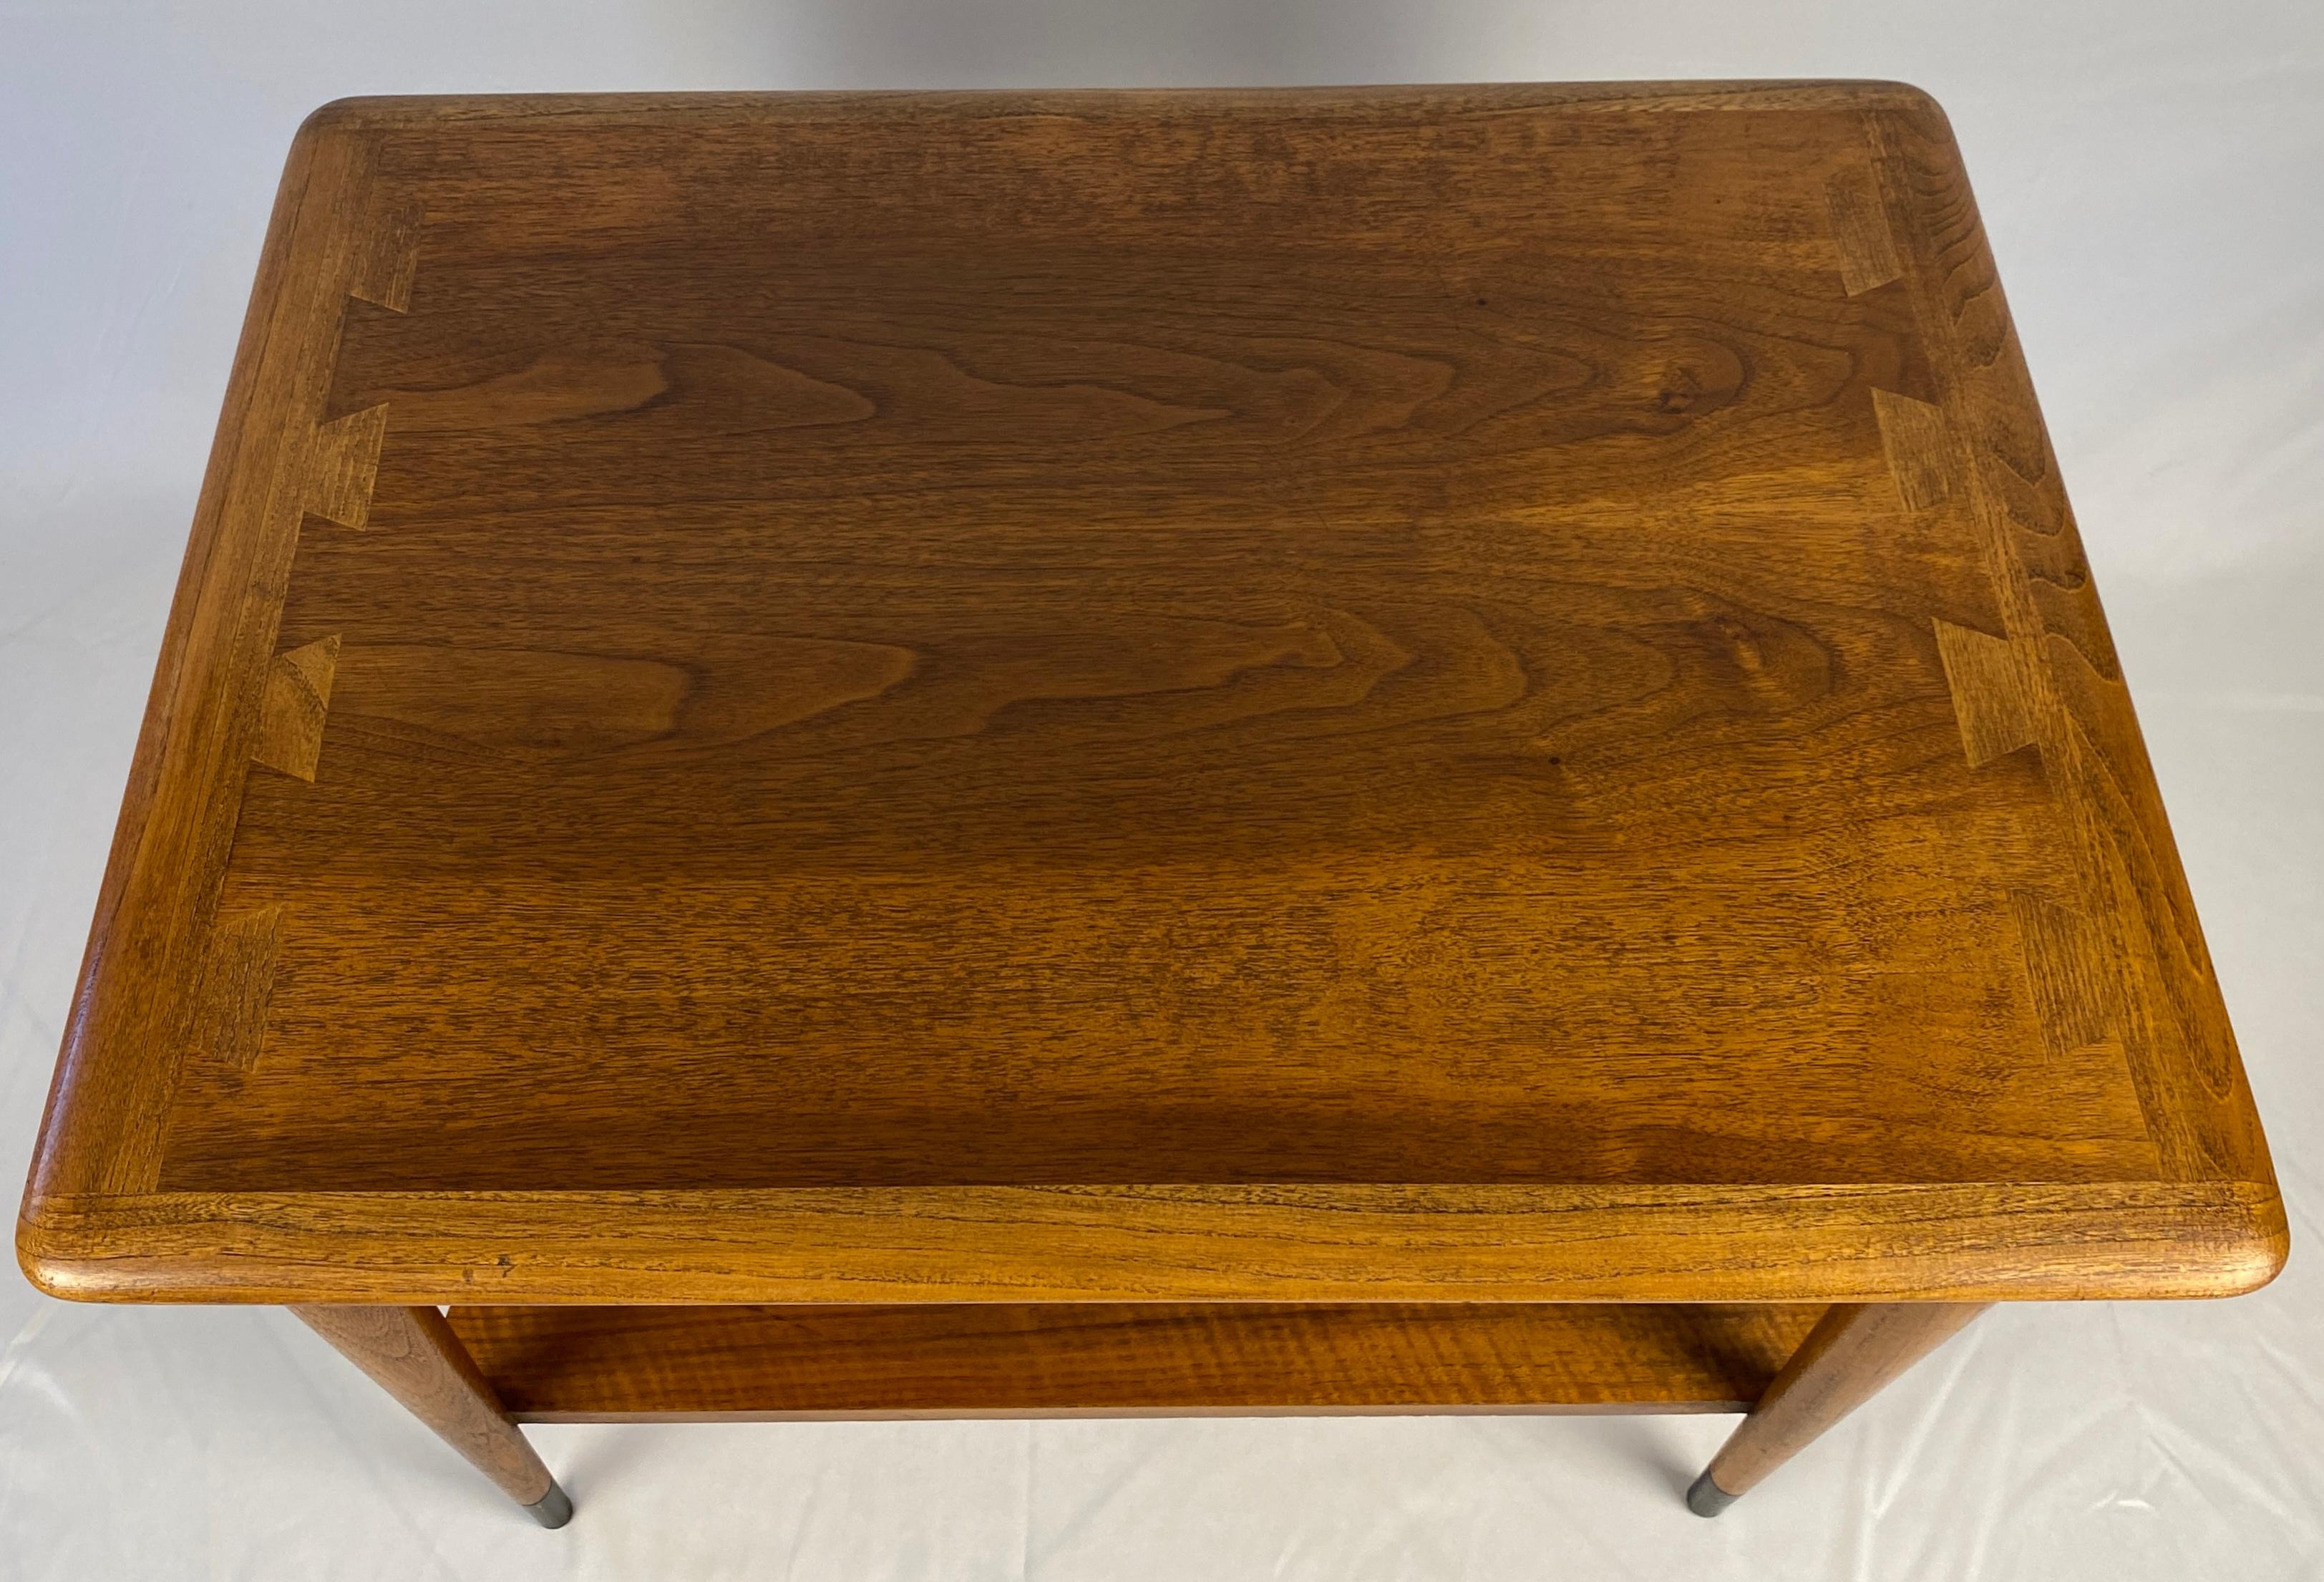 20th Century Scandinavian Style Wooden Coffee Table or End Table with Bottom Shelf For Sale